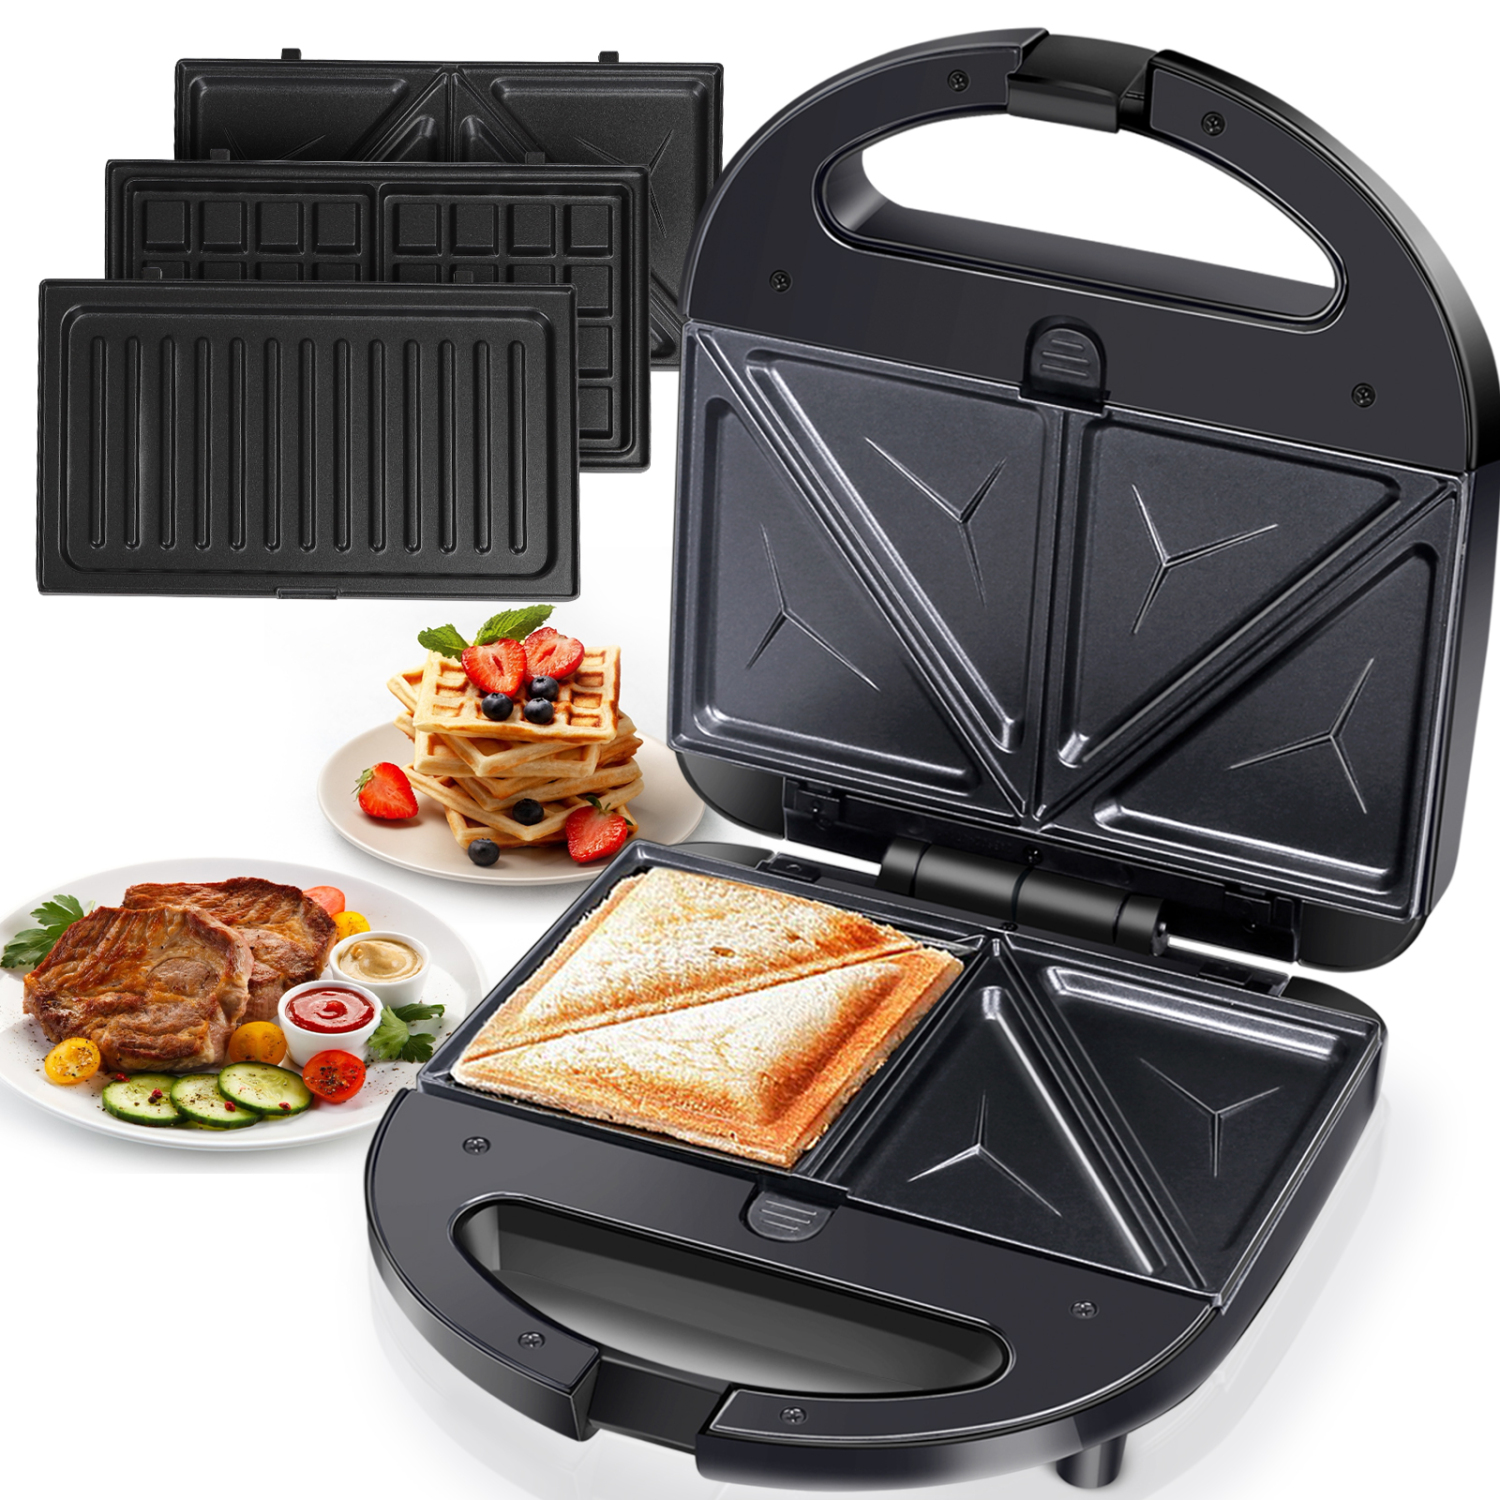 Aigostar Sandwich Maker Panini Press Grill, 3 in 1 Waffle Maker with Removable Non-stick Plates, Electric Grilled Cheese Maker, Portable Cool Touch Handle, Led Indicator Lights & Easy to Clean, 750W